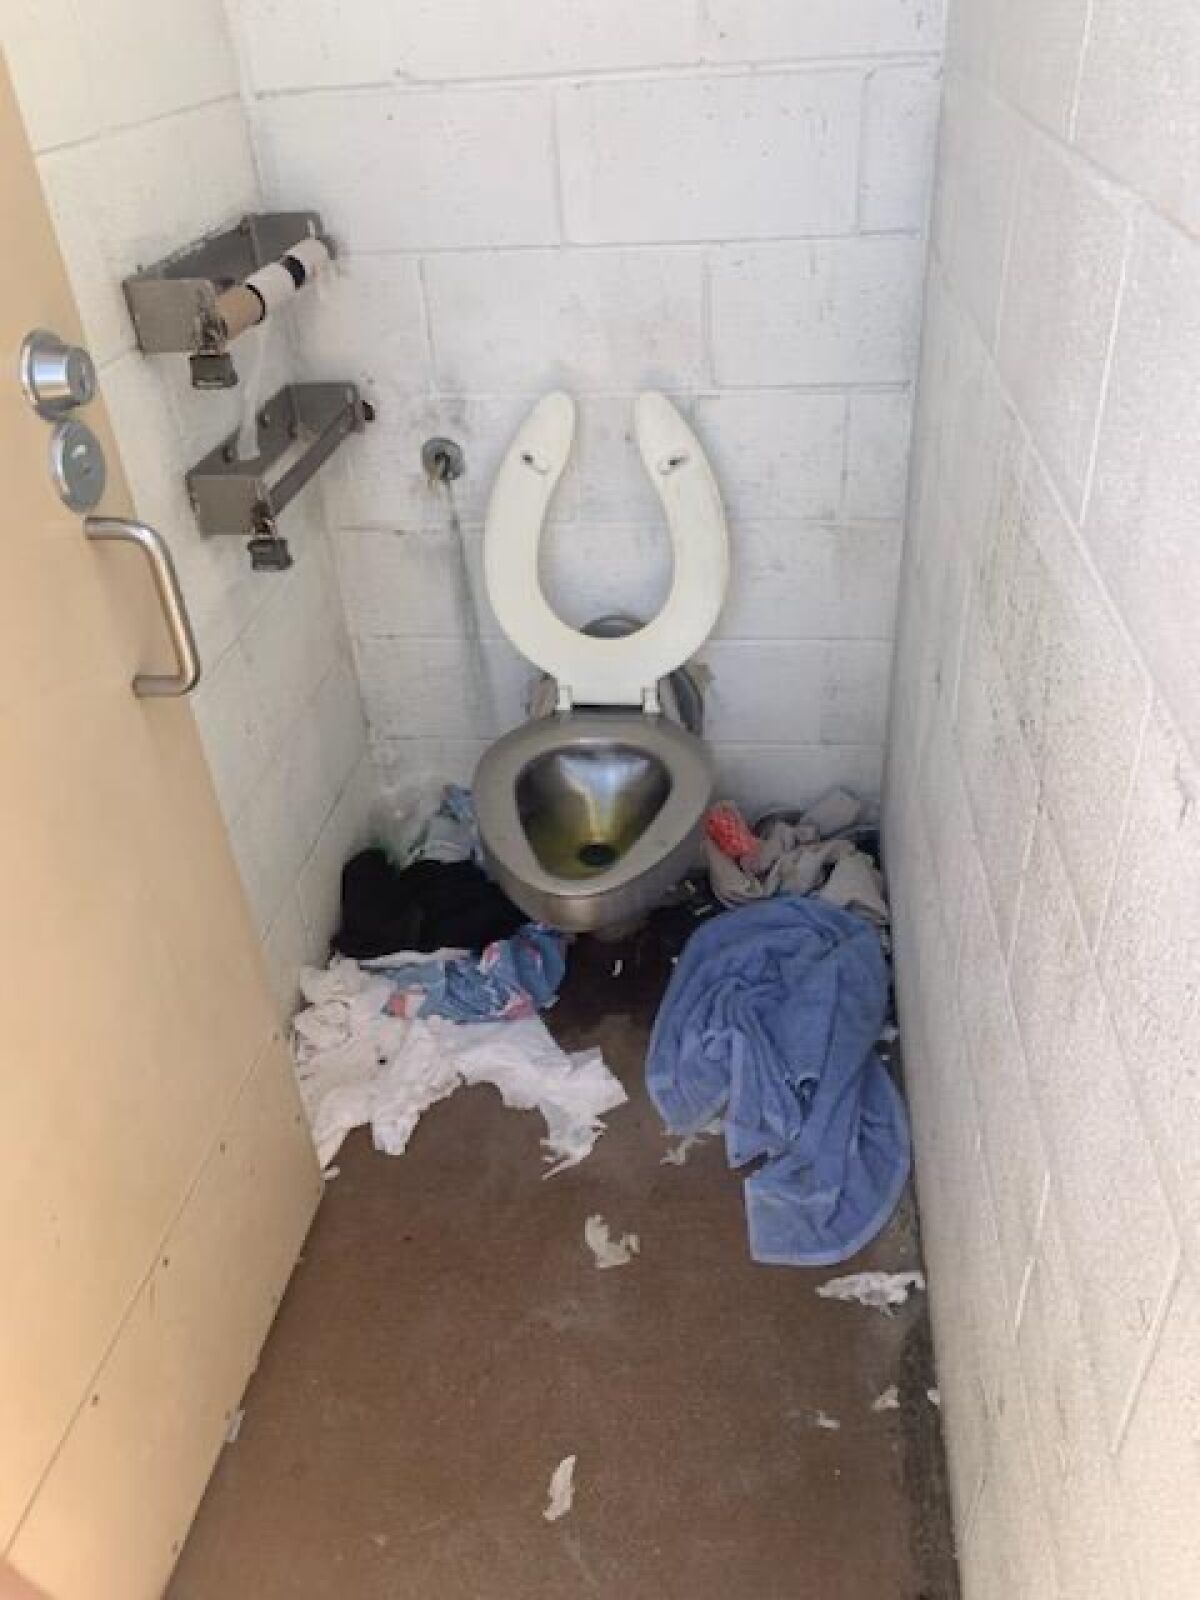 Resident Mike McCormack called this condition "nuts" at the south restroom facility at La Jolla Shores' Kellogg Park.